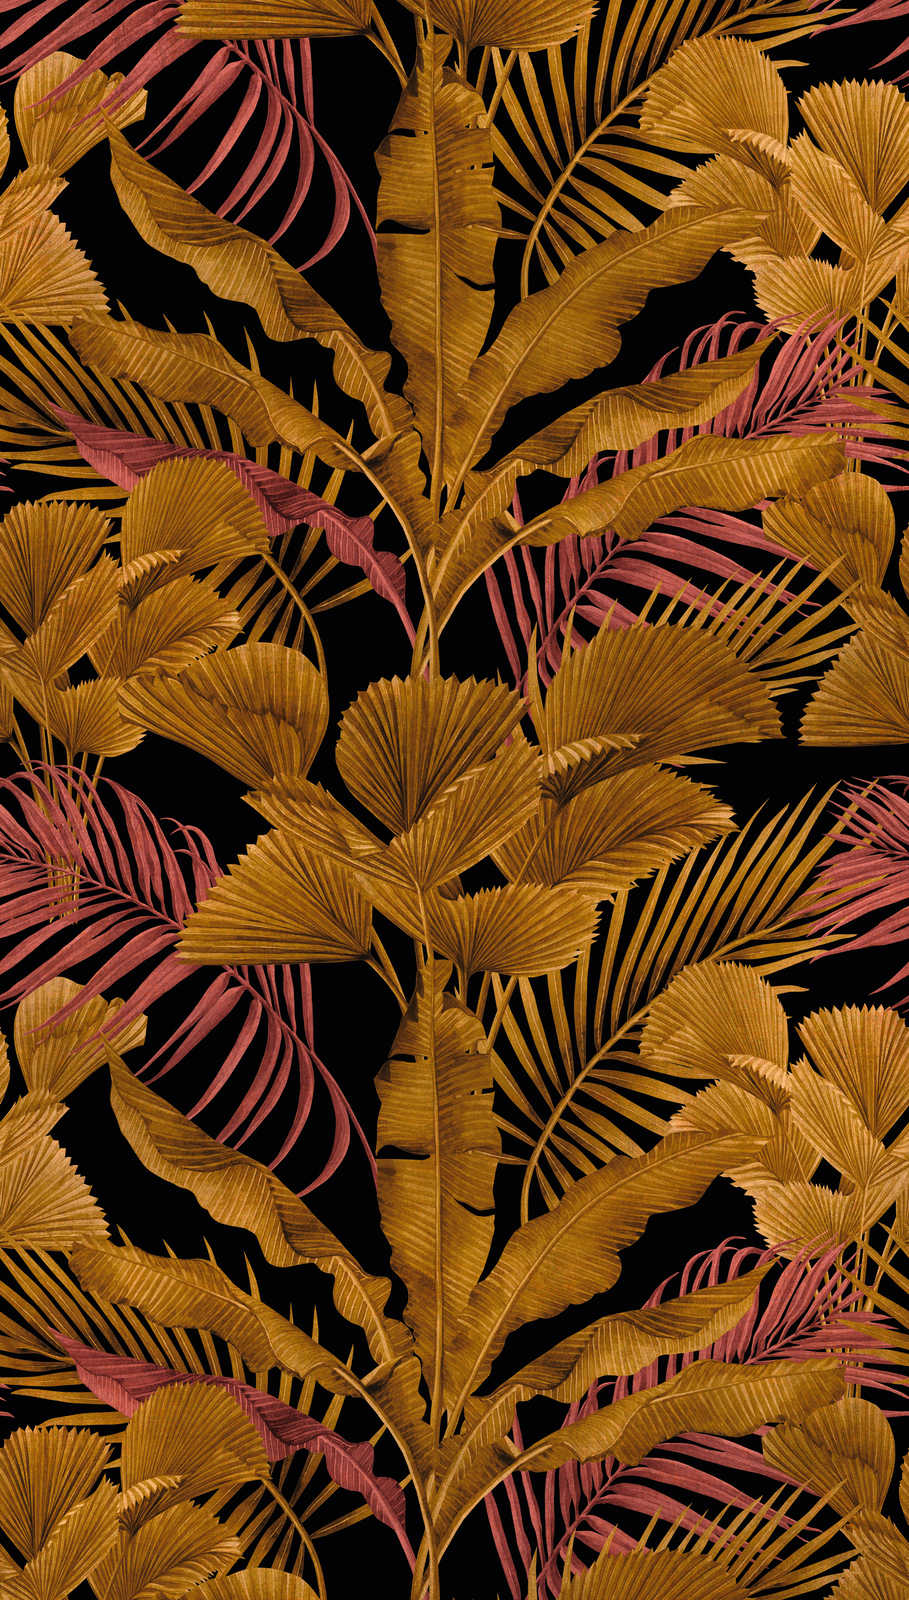             Non-woven wallpaper with different jungle leaves - black, gold, pink
        